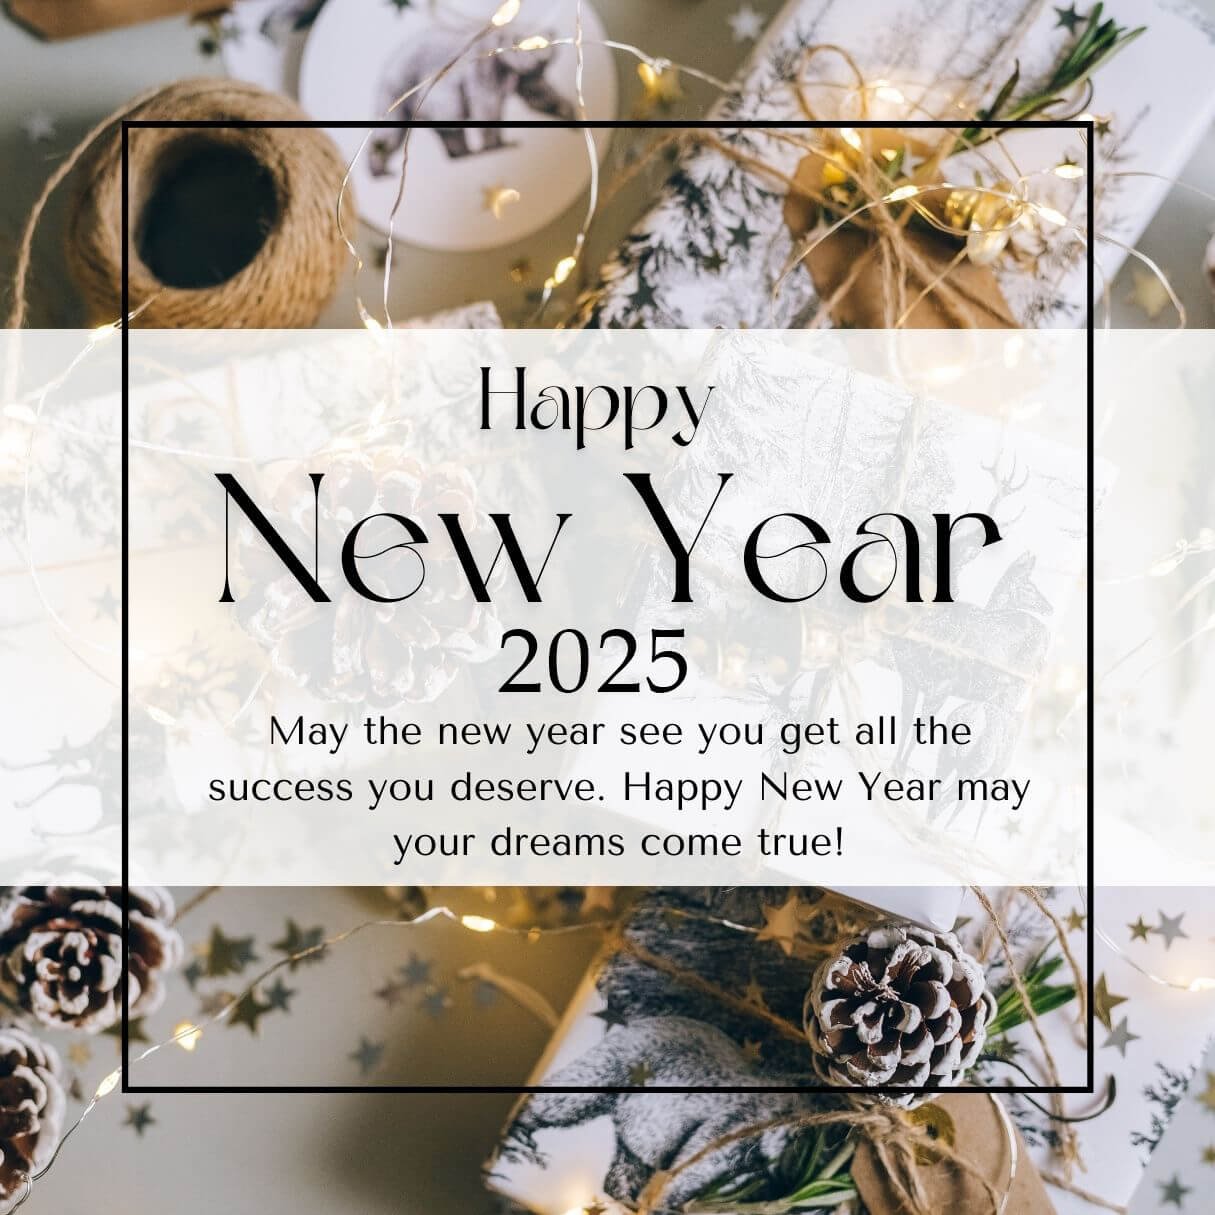 You are currently viewing 70 Happy New Year Wishes for Coworkers 2025 (With Images)